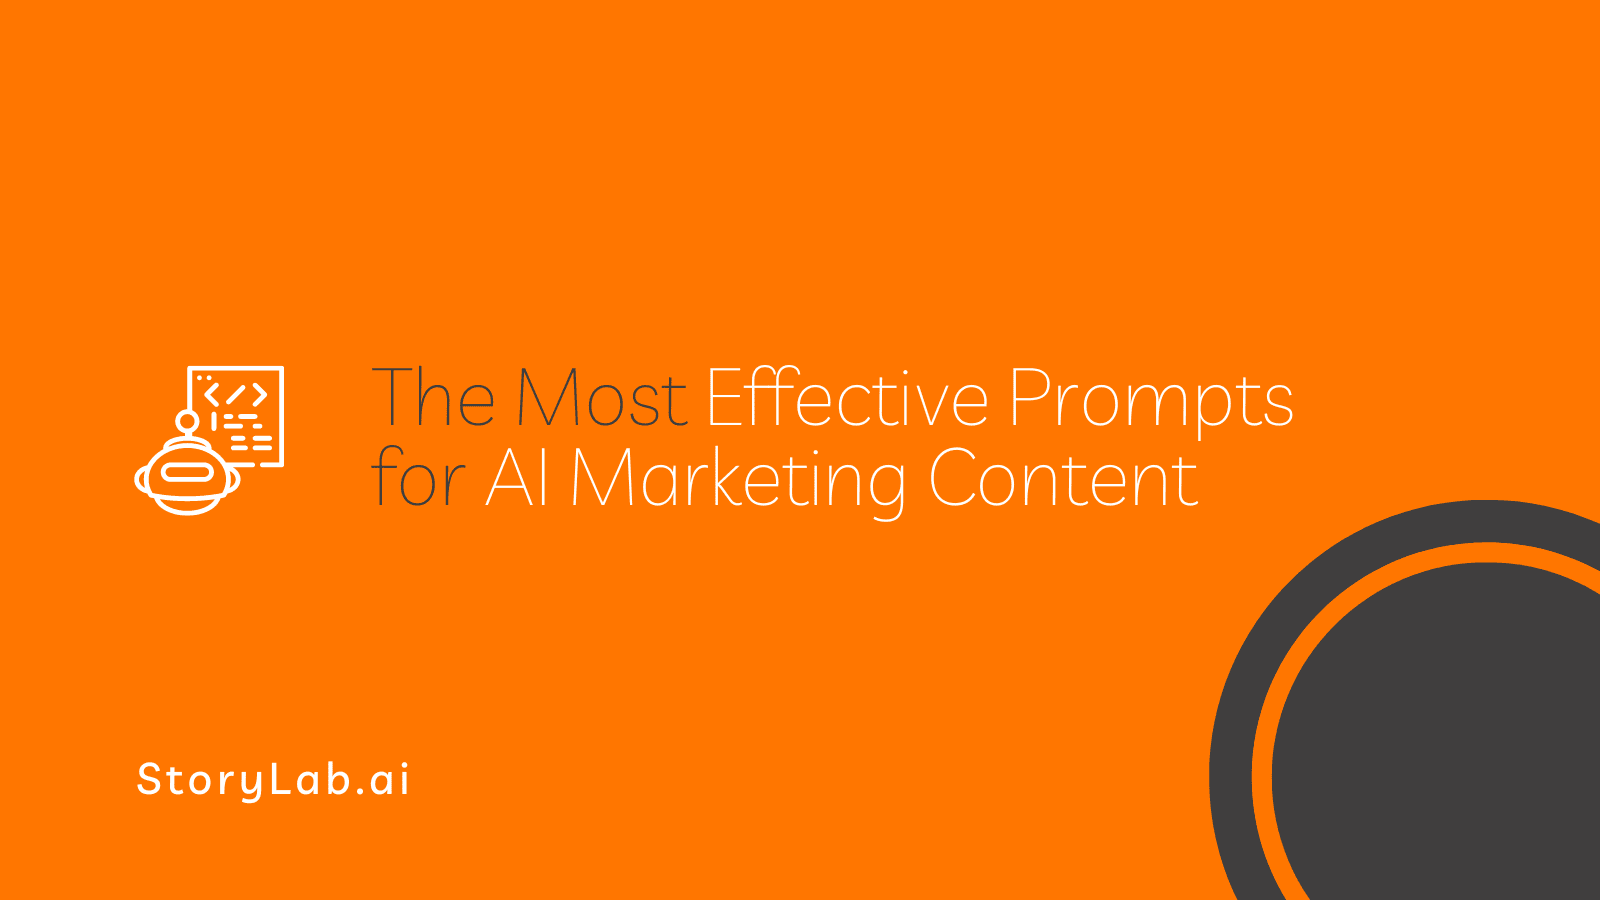 The Most Effective Prompts for AI Marketing Content